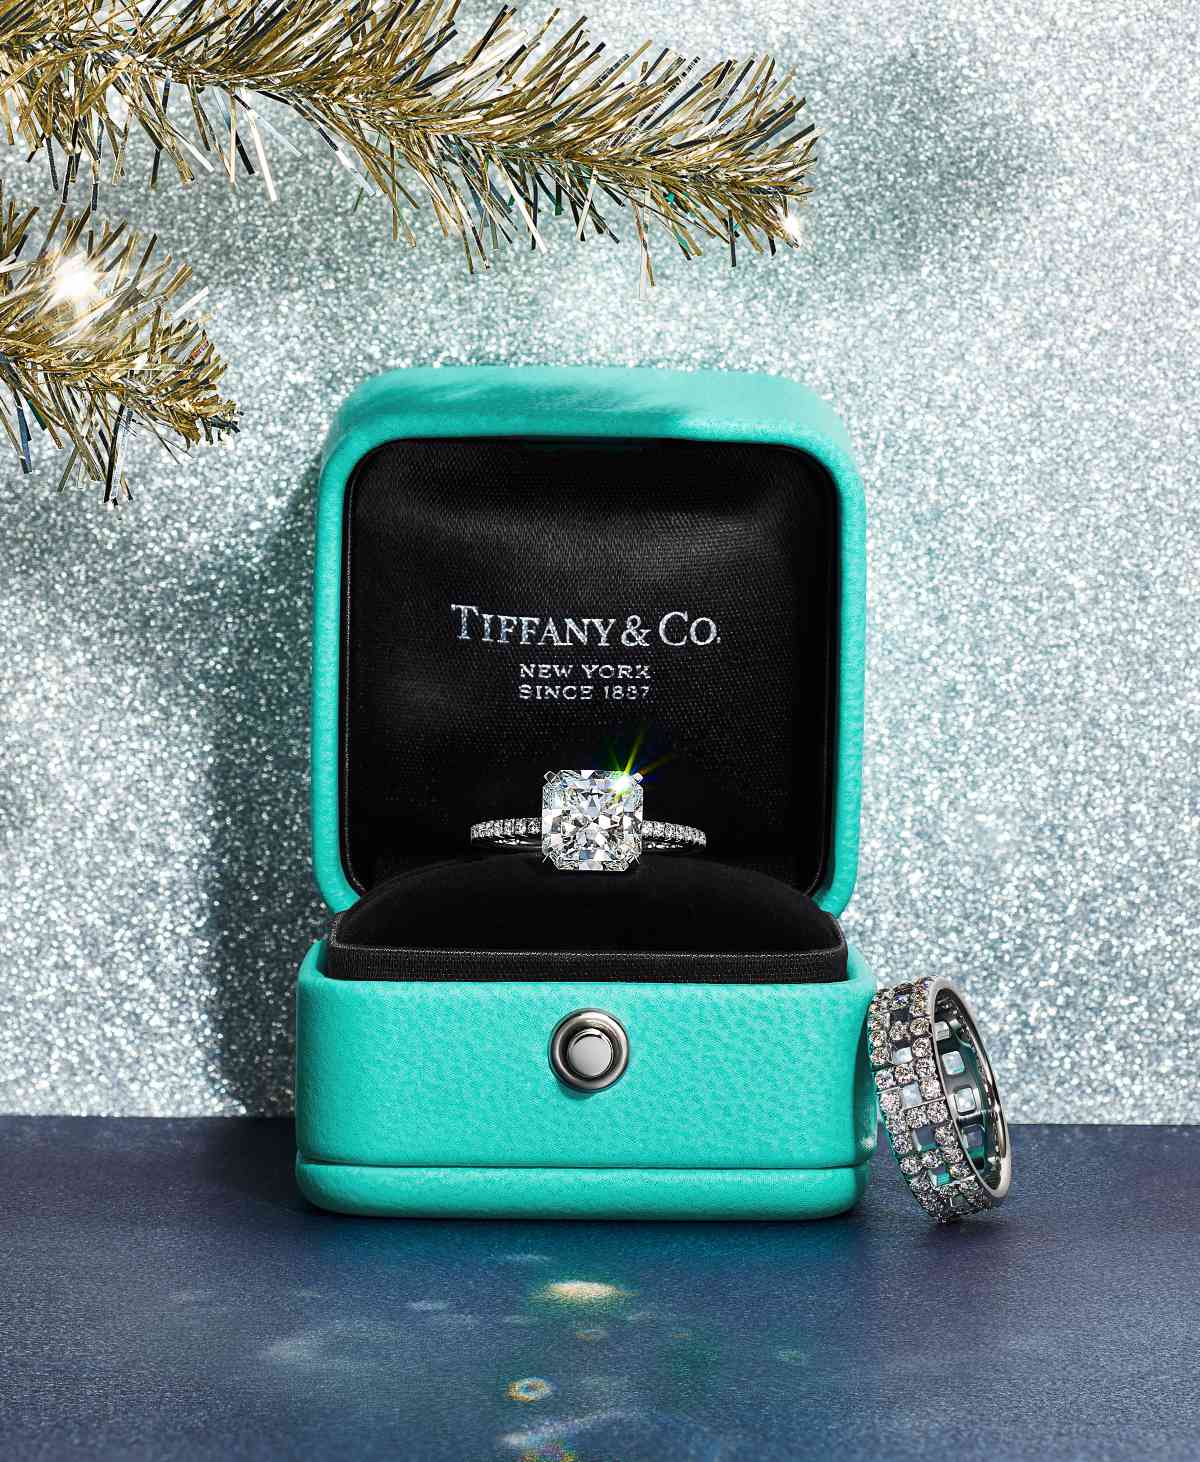 Tiffany & Co. X Andy Warhol Limited-Edition Collection